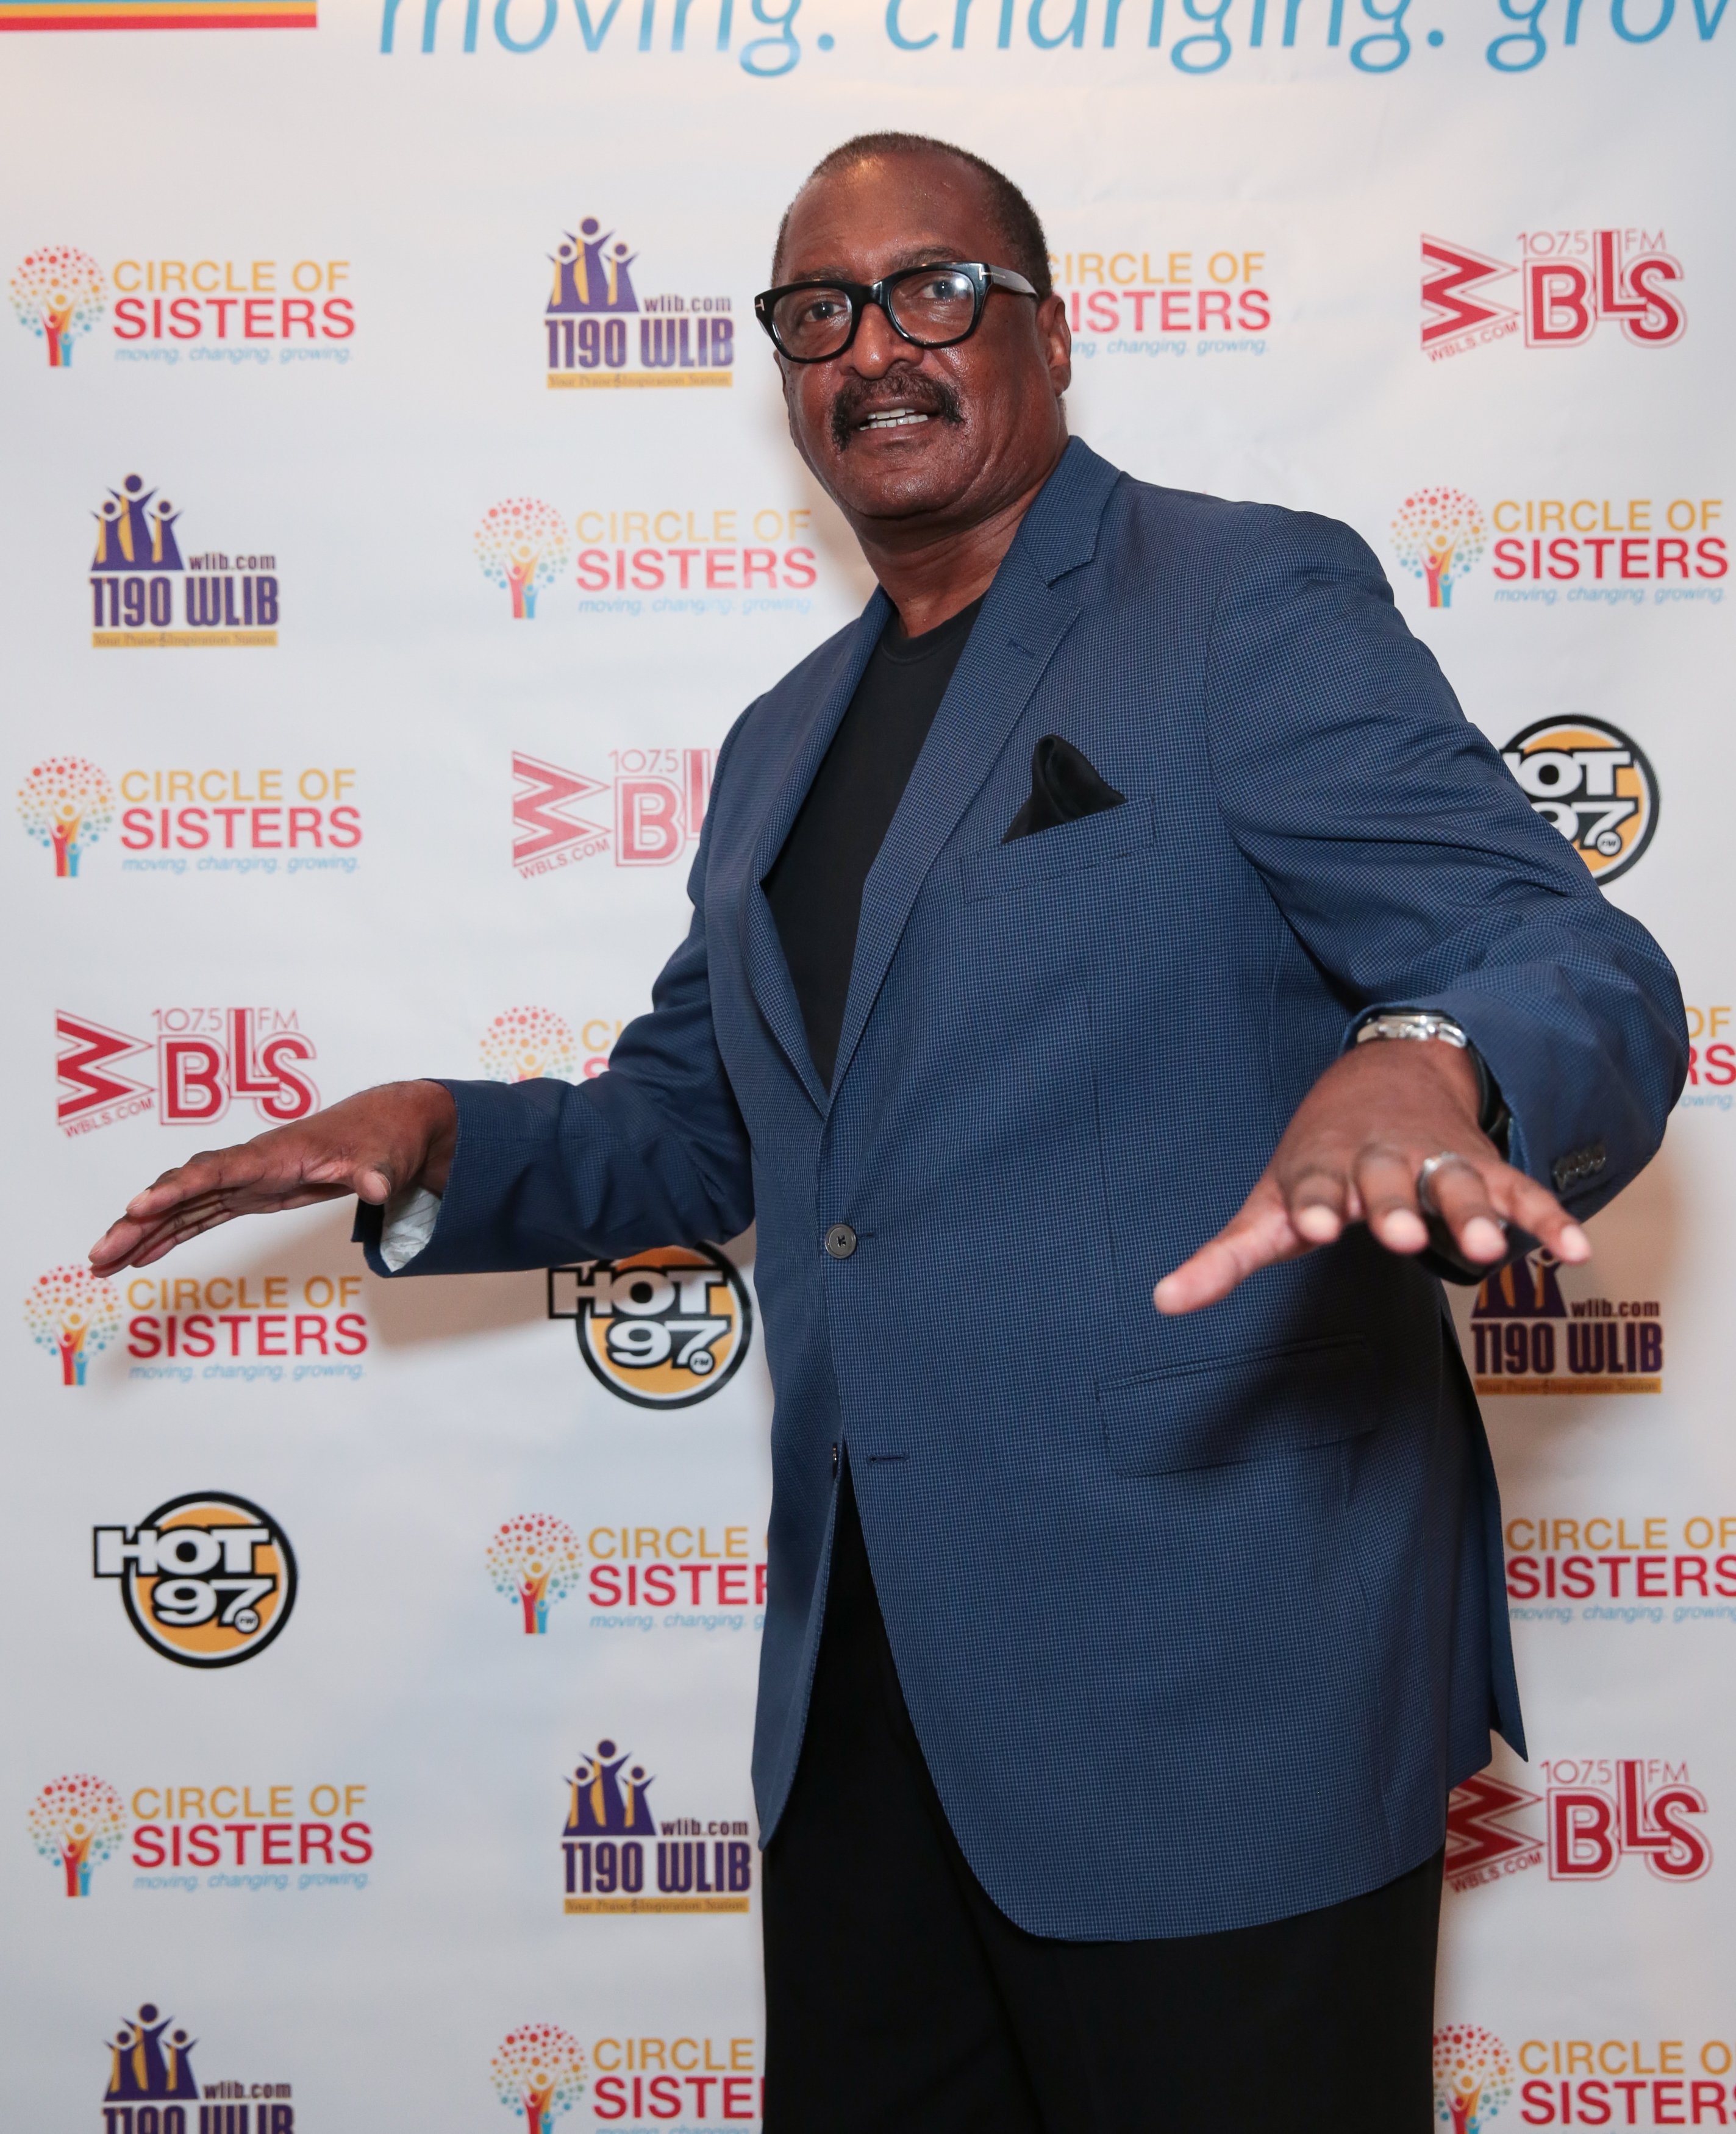 Mathew Knowles at the '2016 Circle of Sisters' on Oct. 15, 2016 in New York City | Photo: Getty Images